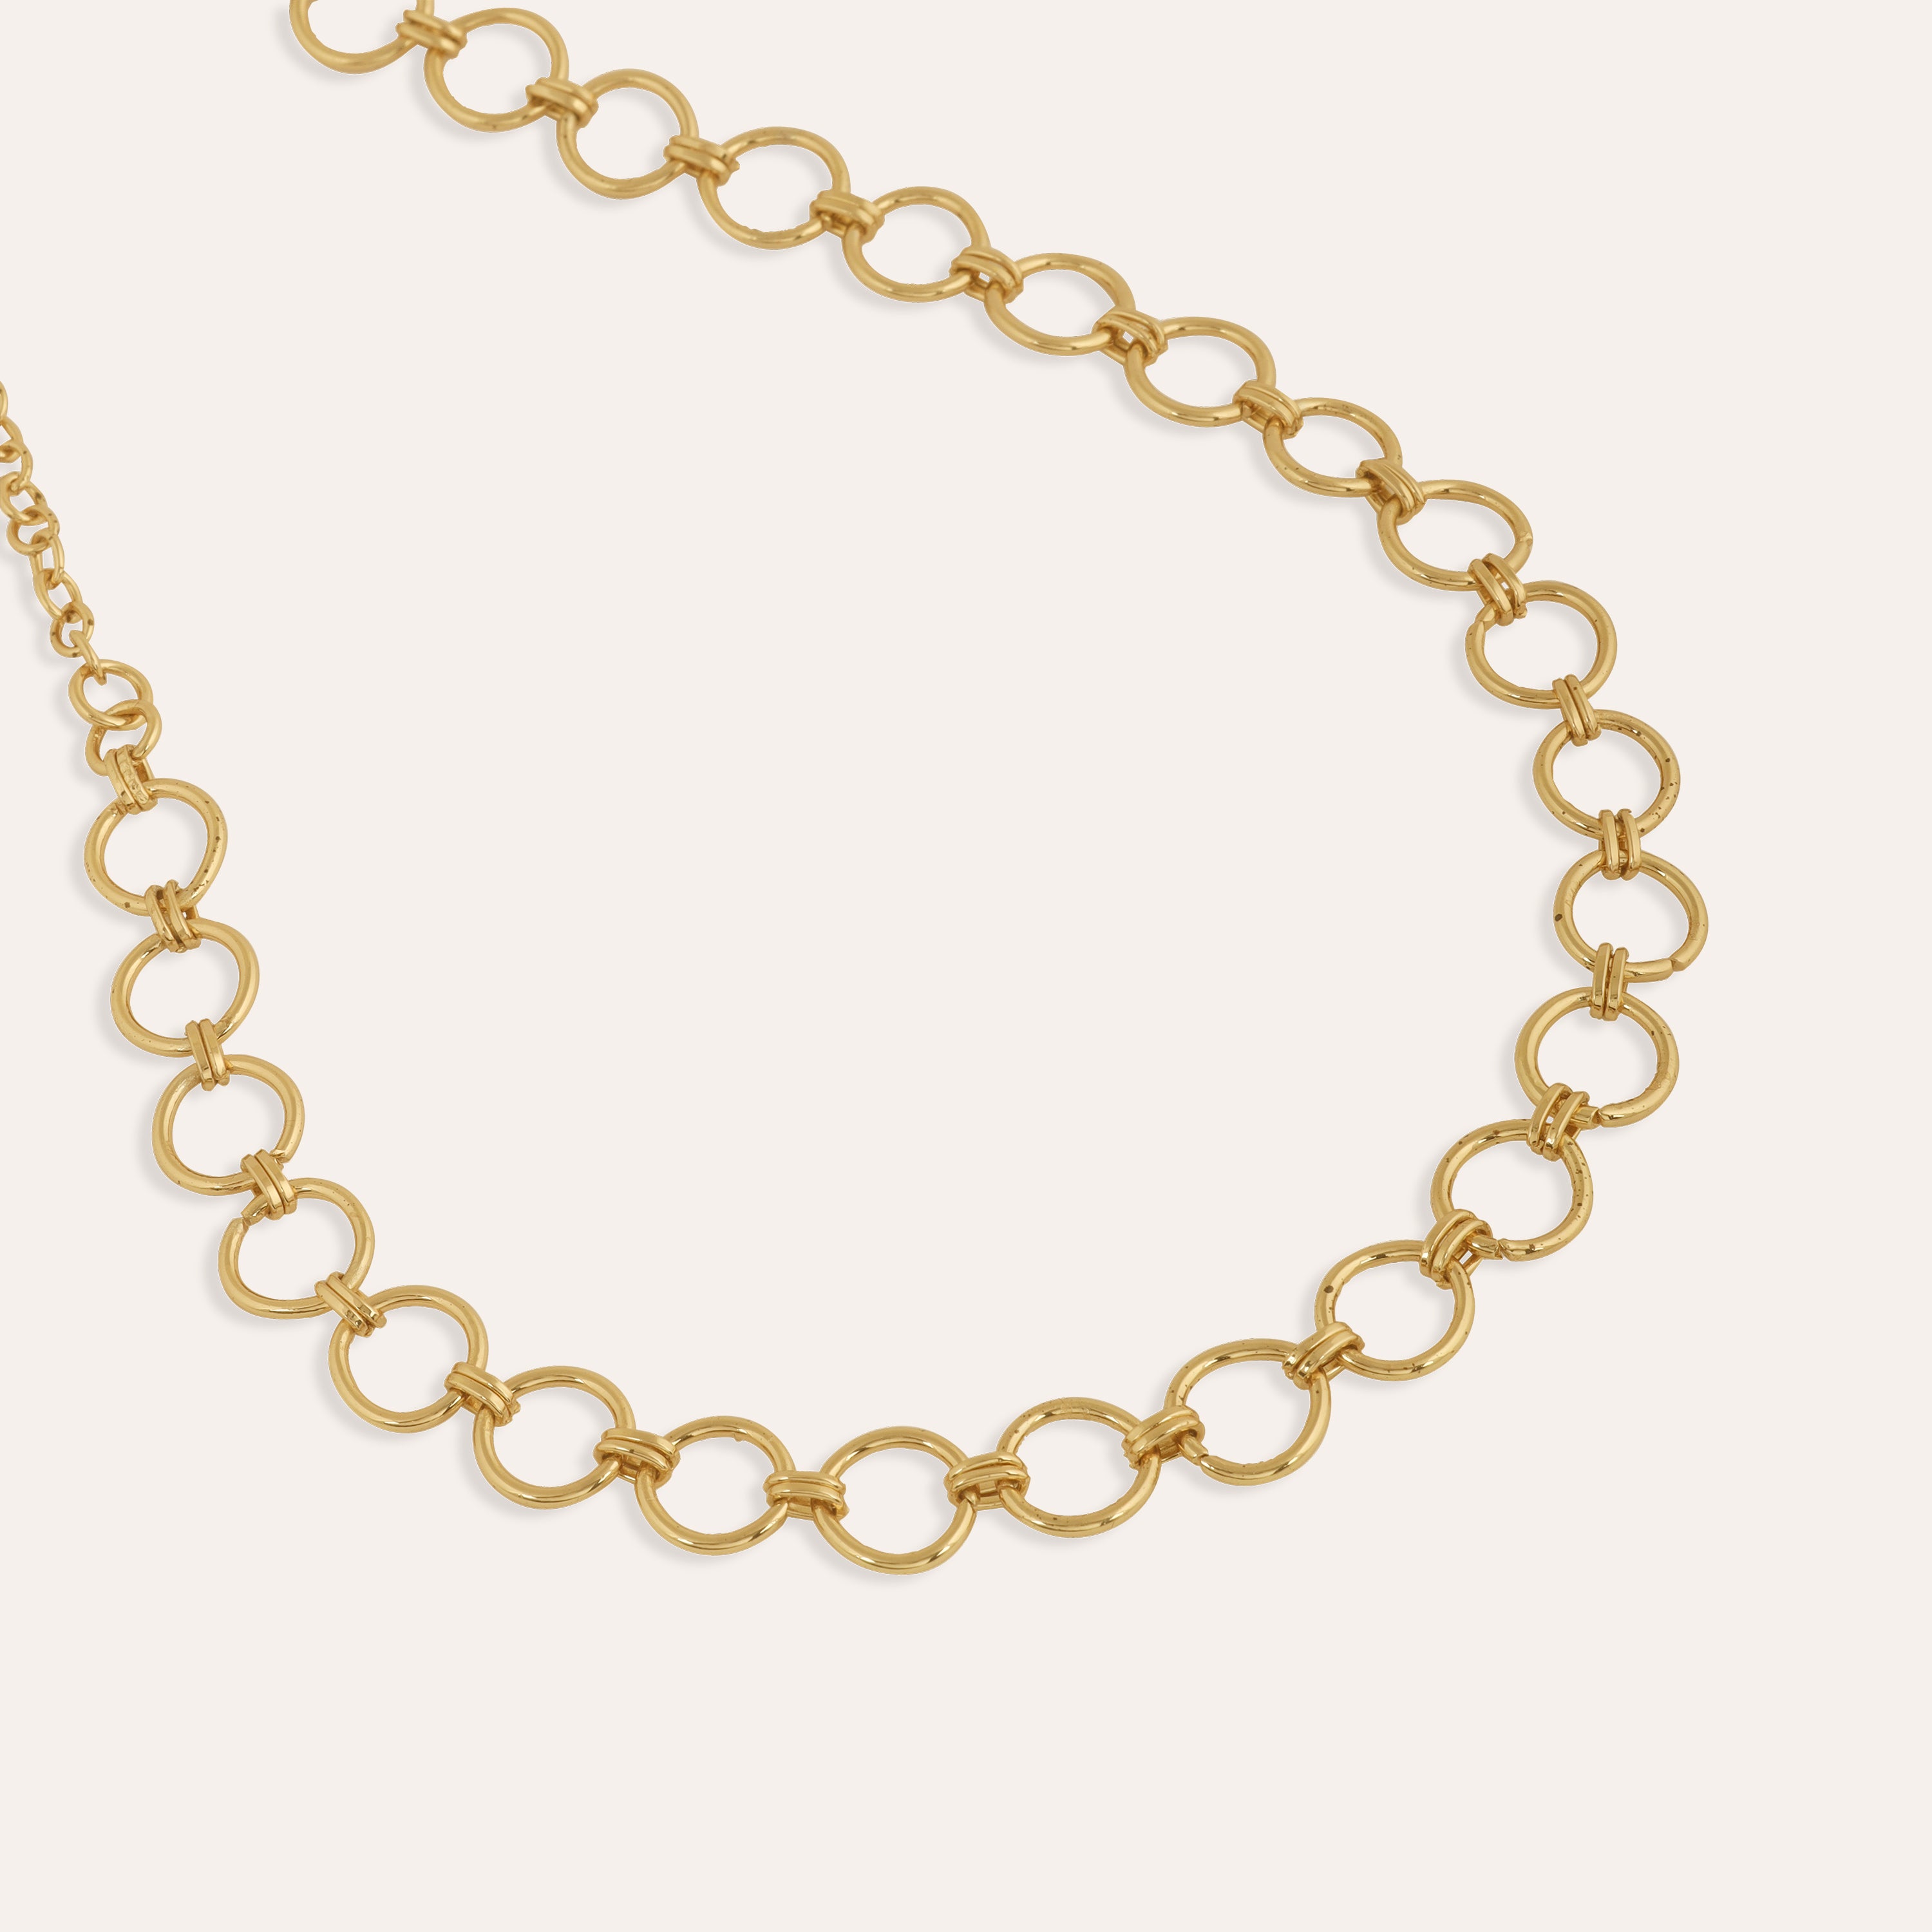 TFC Napoli Luxury Gold Plated Chain Necklace-Enhance your elegance with our collection of gold-plated necklaces for women. Choose from stunning pendant necklaces, chic choker necklaces, and trendy layered necklaces. Our sleek and dainty designs are both affordable and anti-tarnish, ensuring lasting beauty. Enjoy the cheapest fashion jewellery, lightweight and stylish- only at The Fun Company